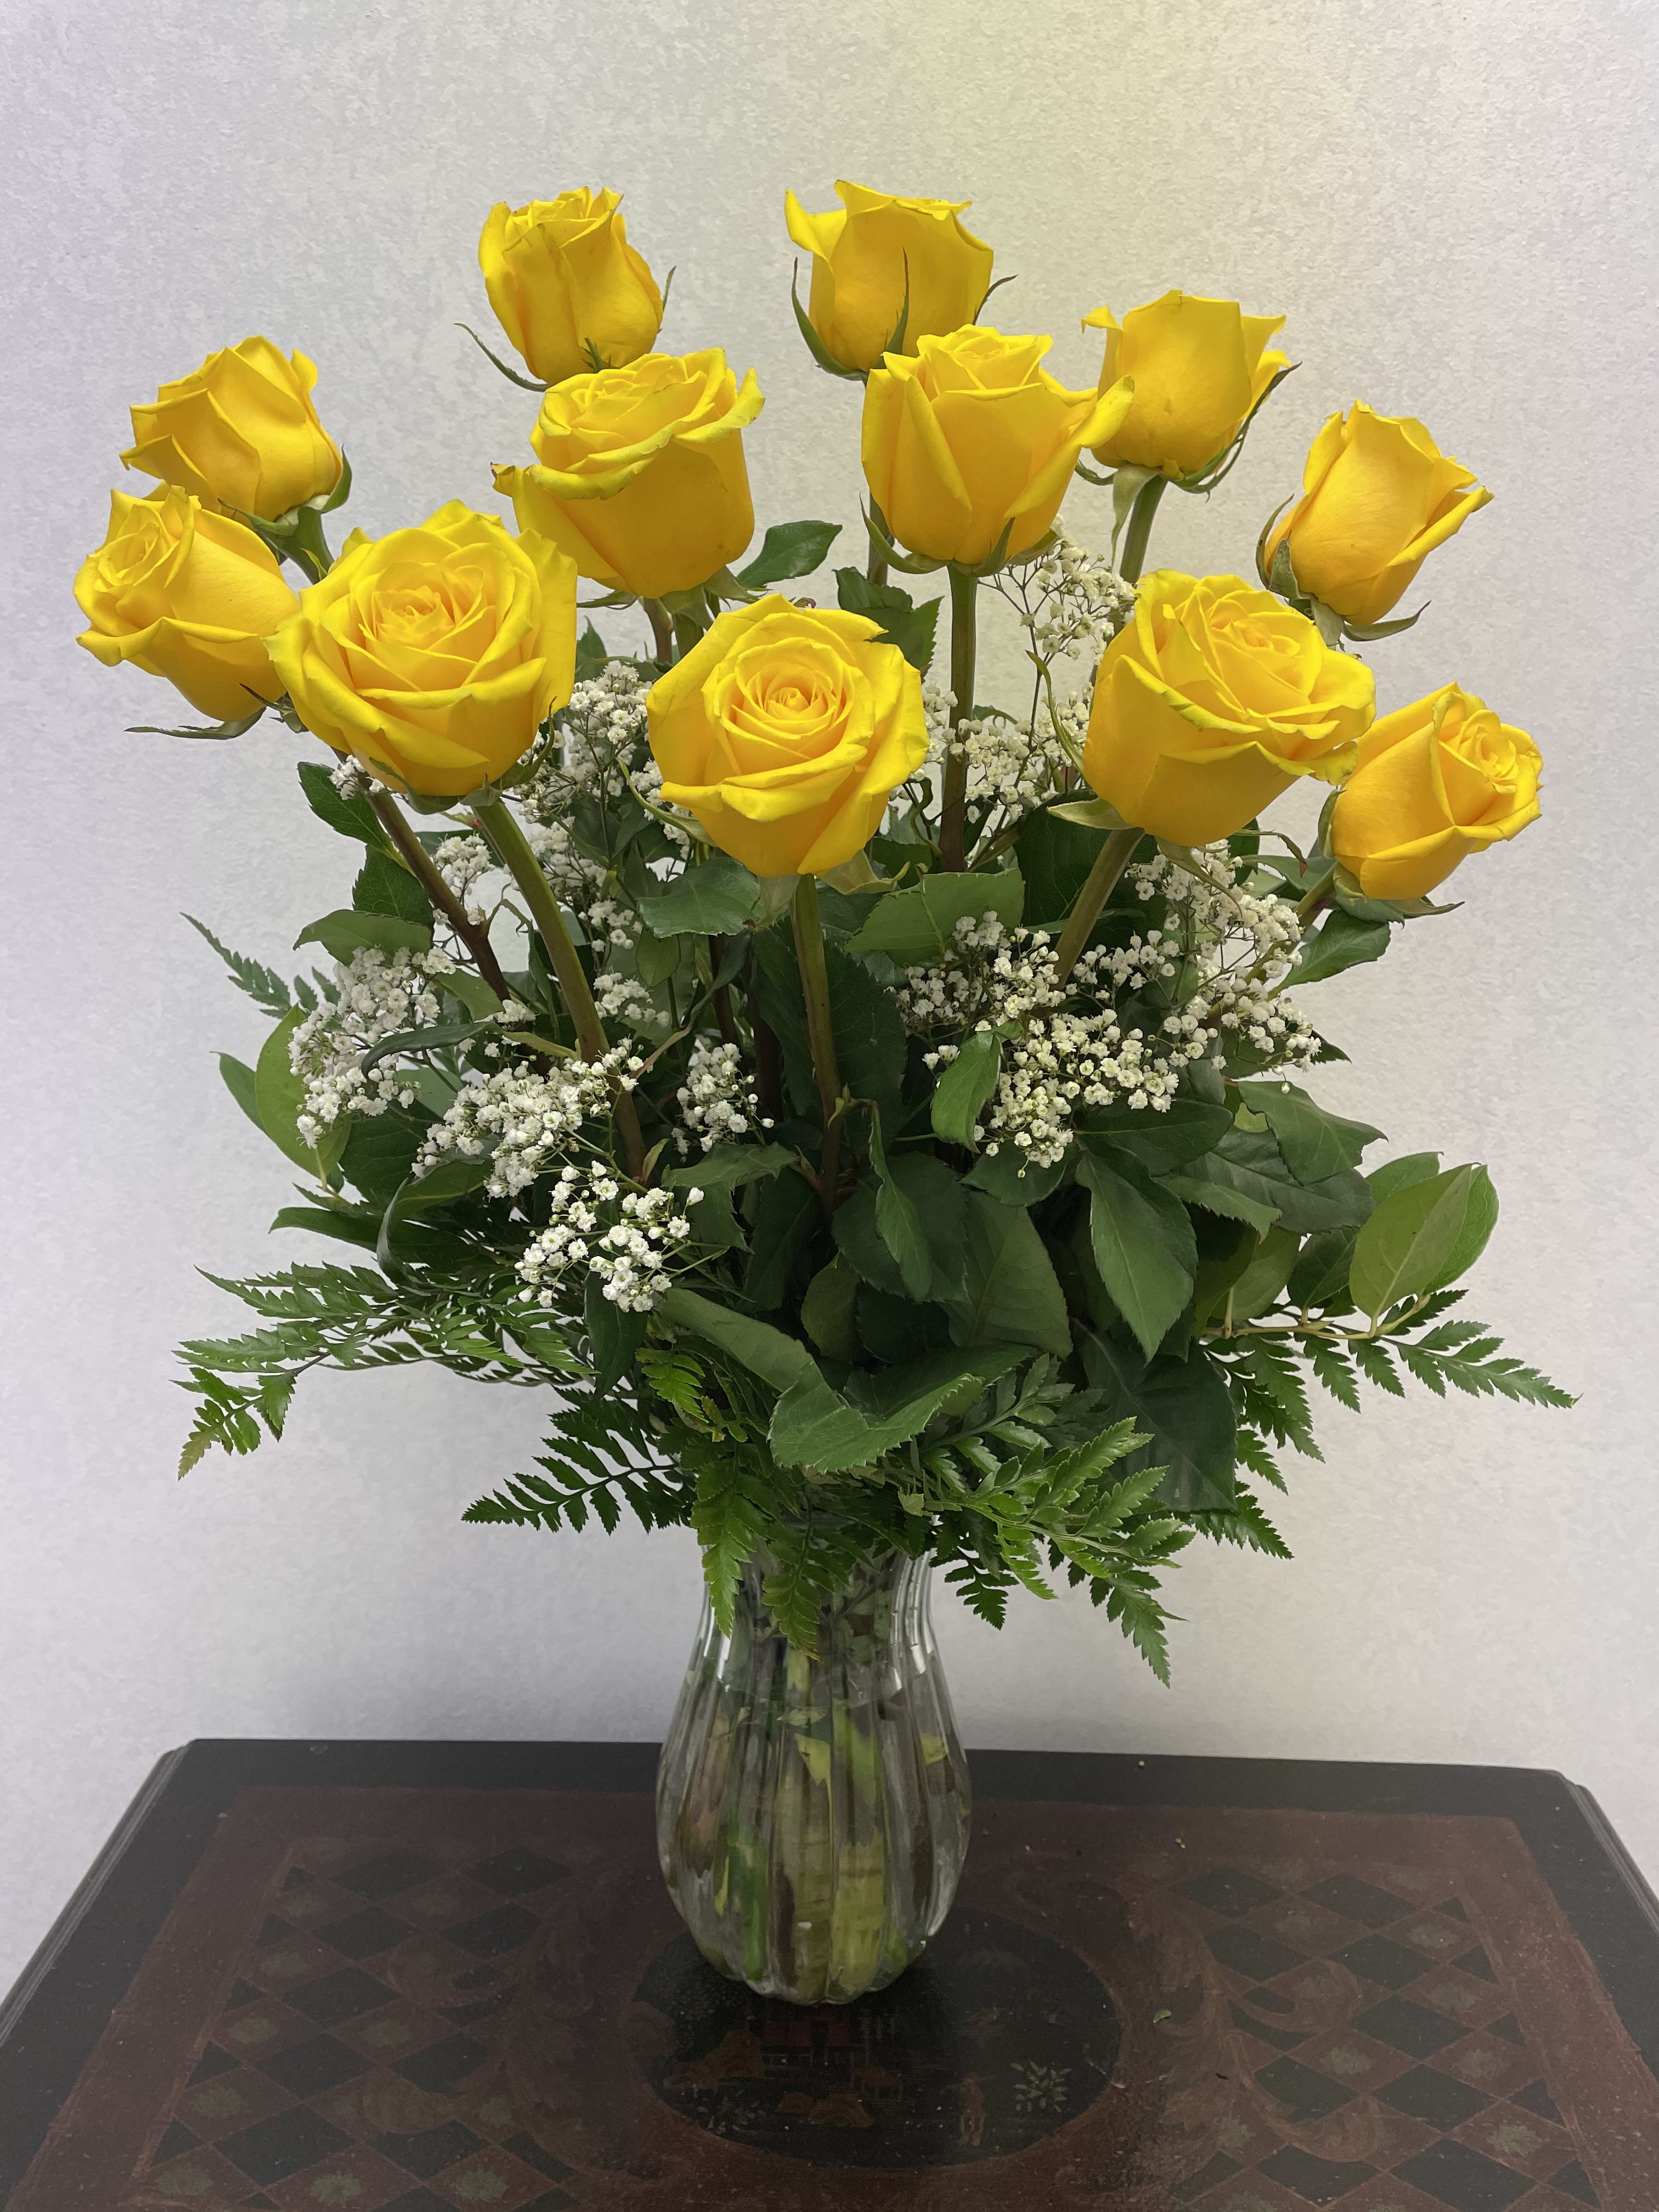 You're My Sunshine Yellow Rose Bouquet  - Sunny yellow roses will brighten anyone's day. This lively bouquet is arranged in a clear glass vase with mixed greens and baby's breath or limonium.